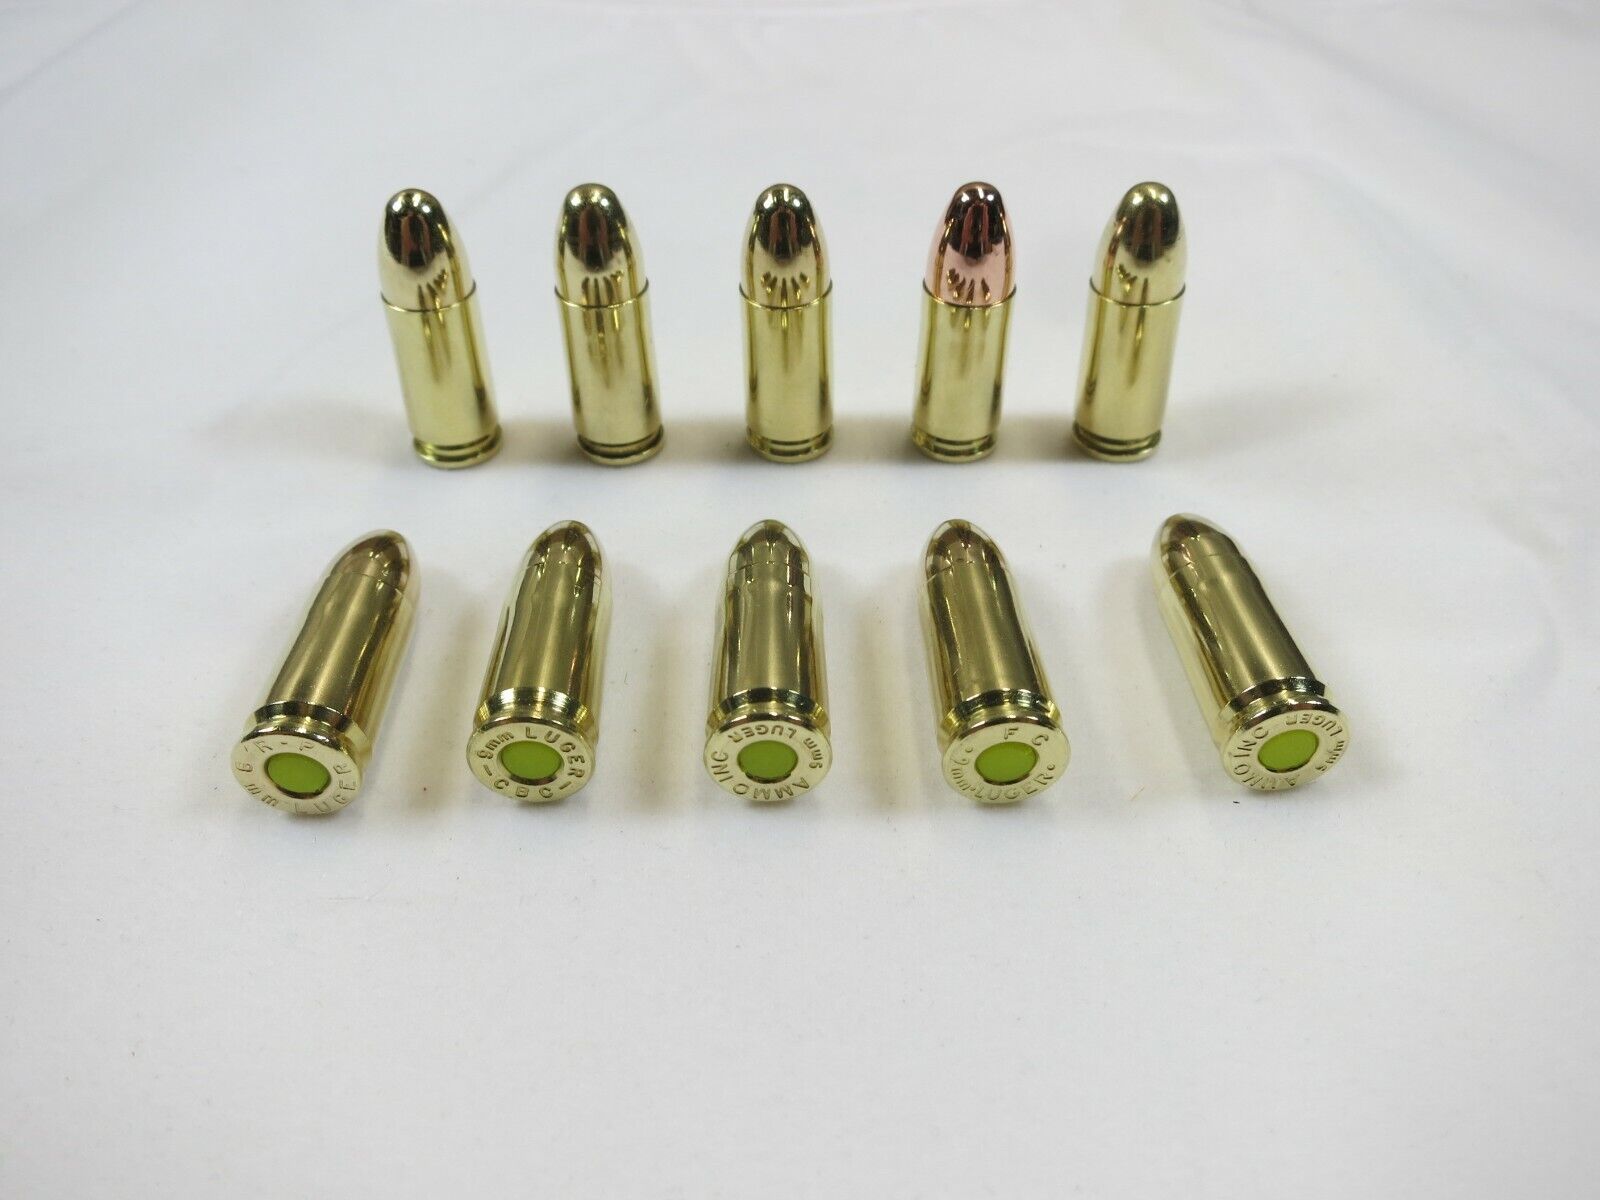 9mm Luger Snap caps / Dummy Training Rounds - Real Weight - Brass - Set of 10